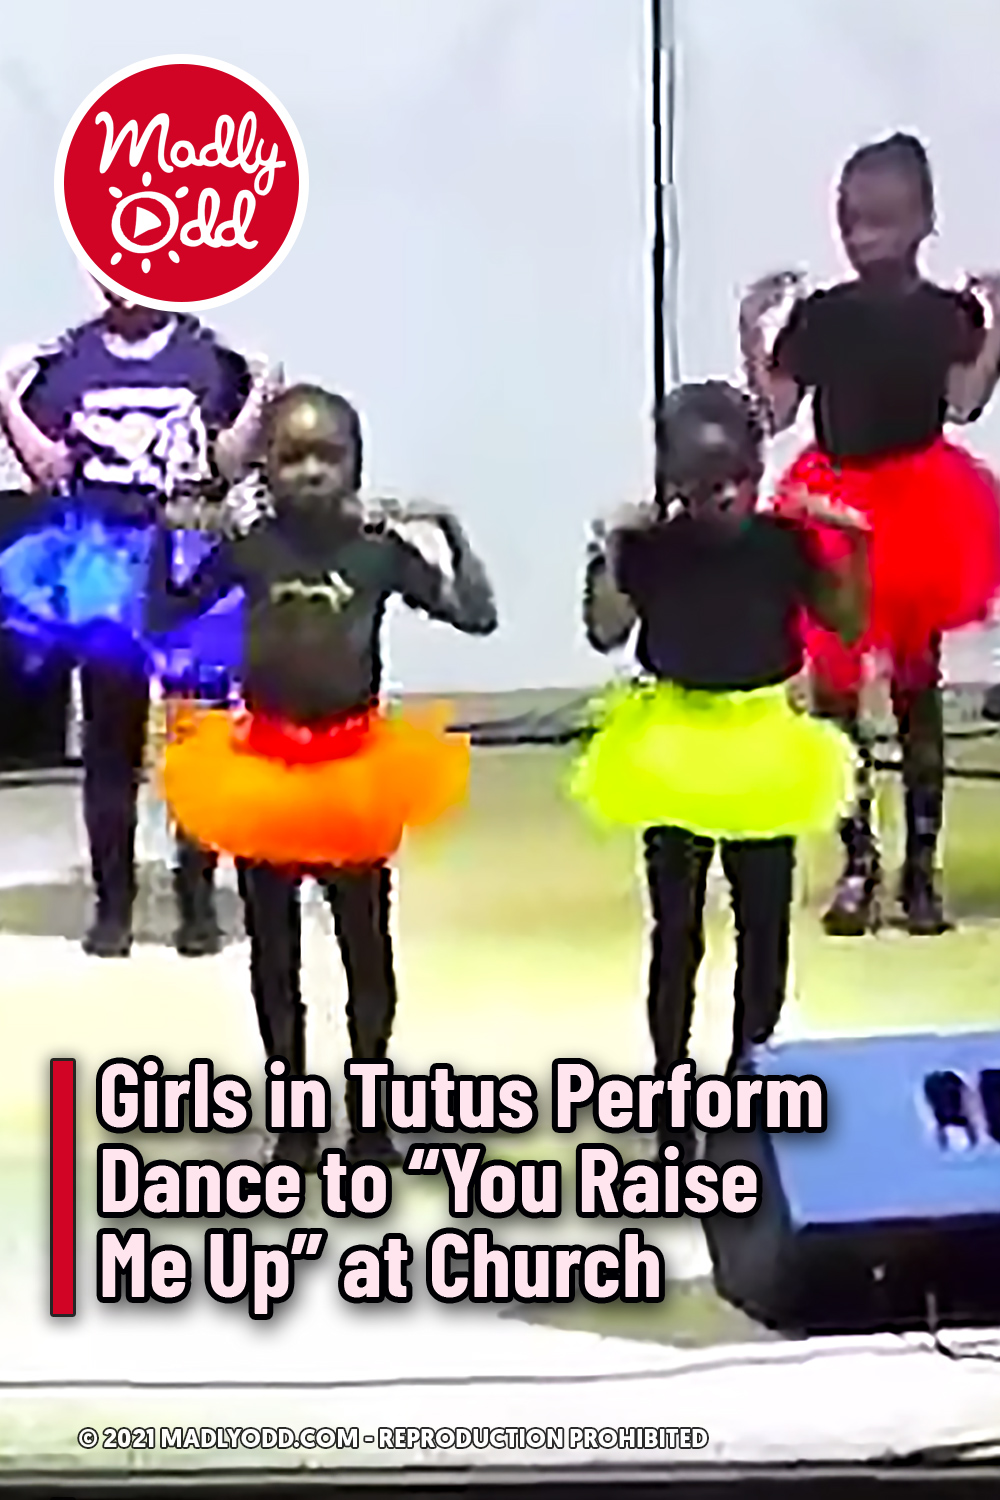 Girls in Tutus Perform Dance to “You Raise Me Up” at Church